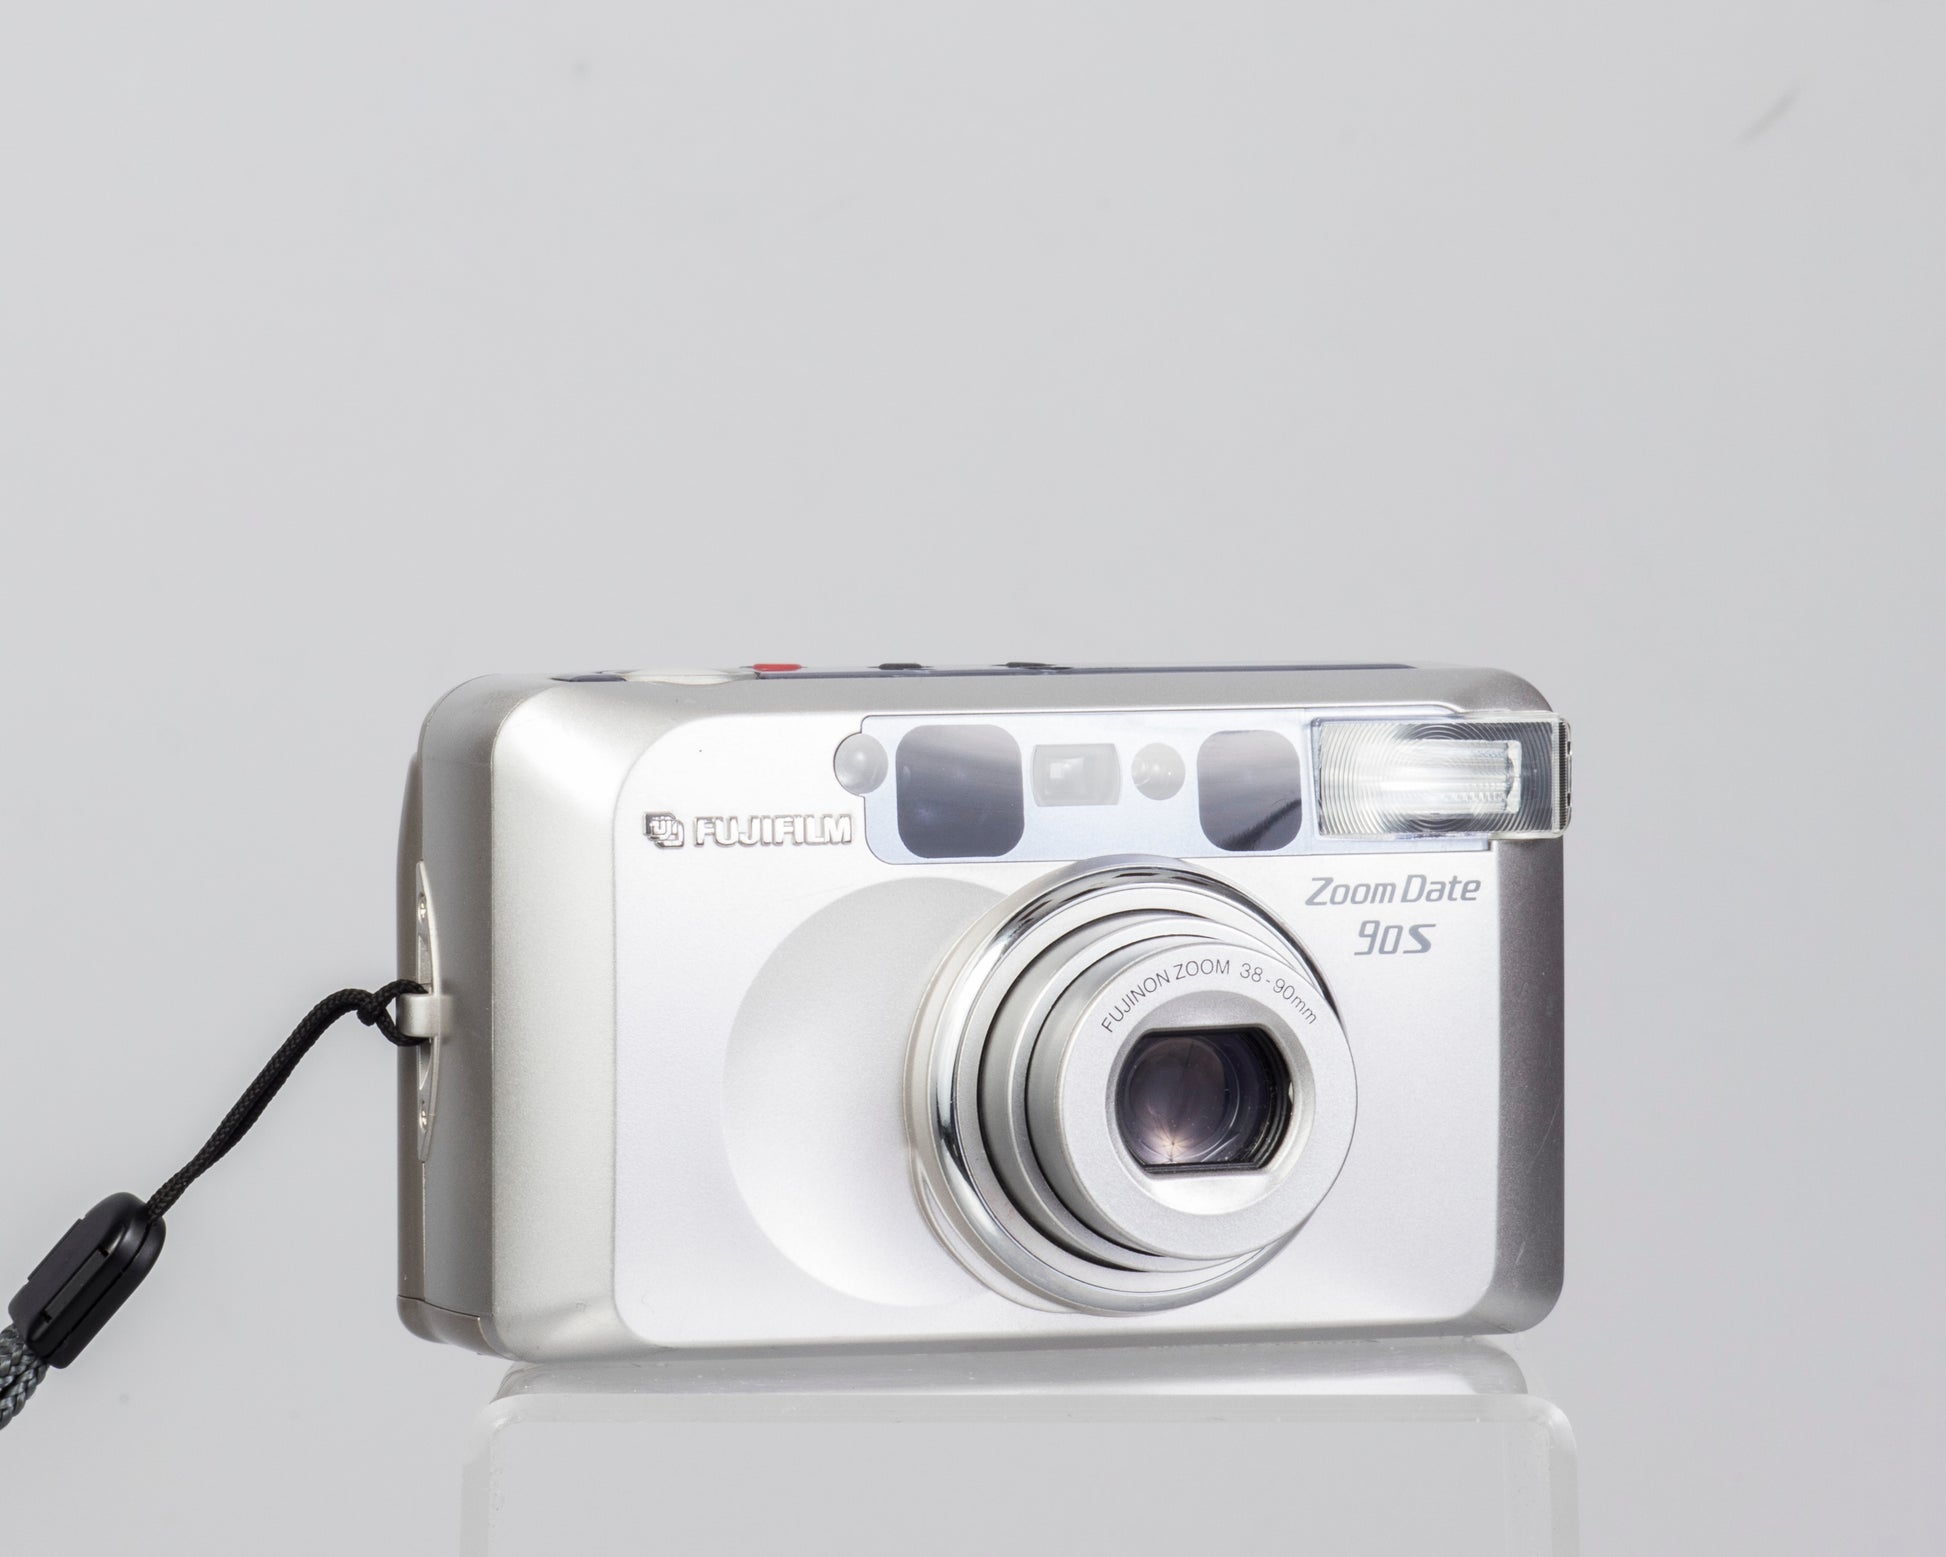 The Fujifilm Zoom Date 90S is a compact 35mm point-and-shoot camera.